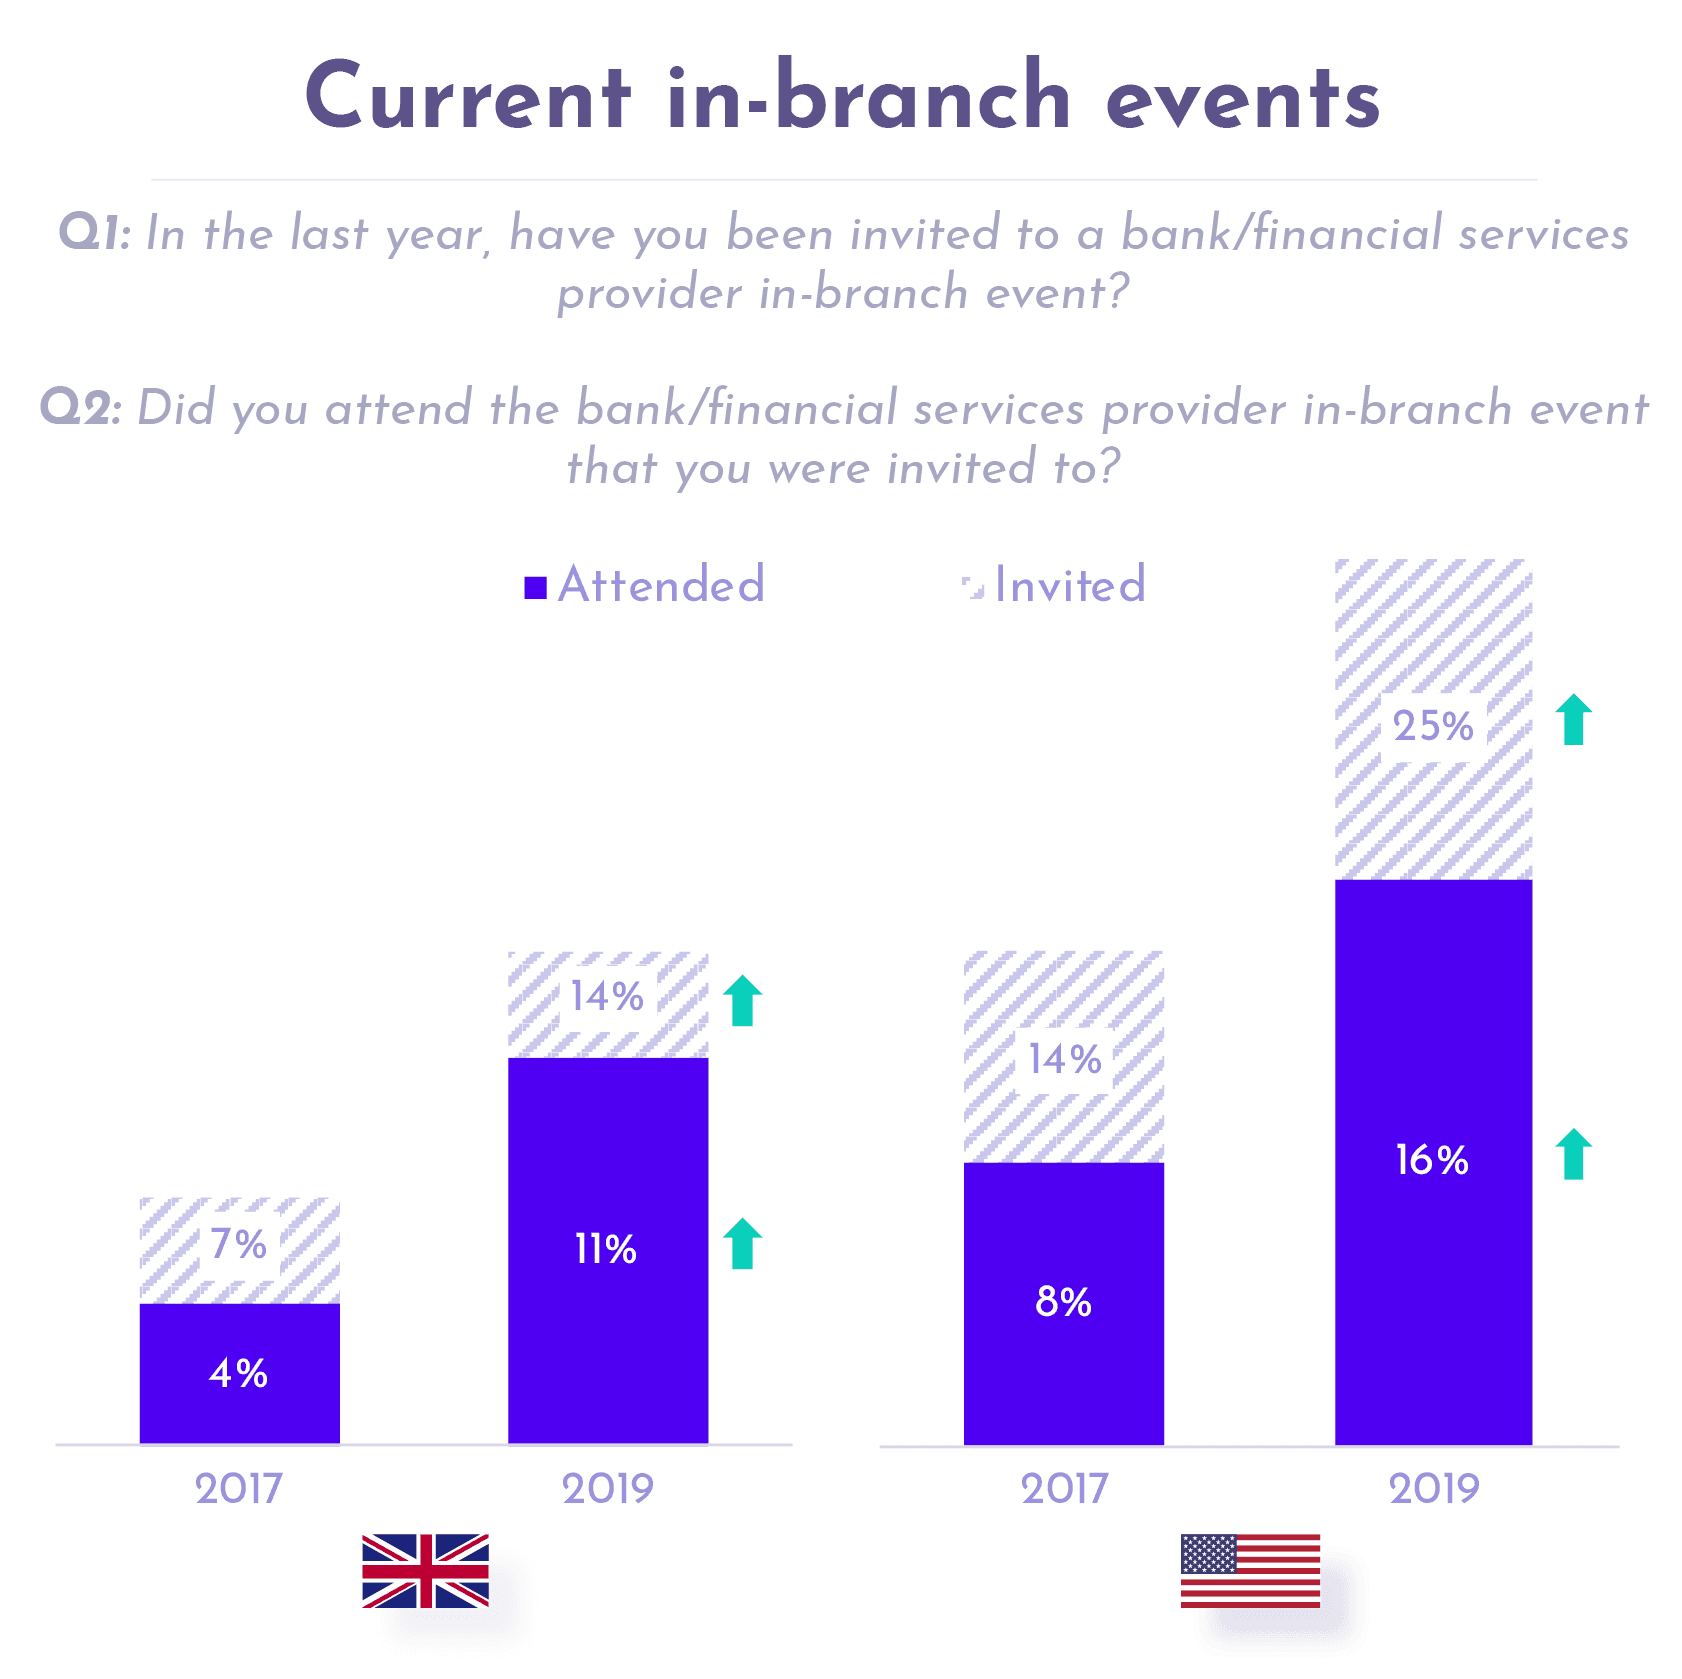 Graph showing the percentages of how often a consumer was invited and attended an in-branch event from 2017 to 2019